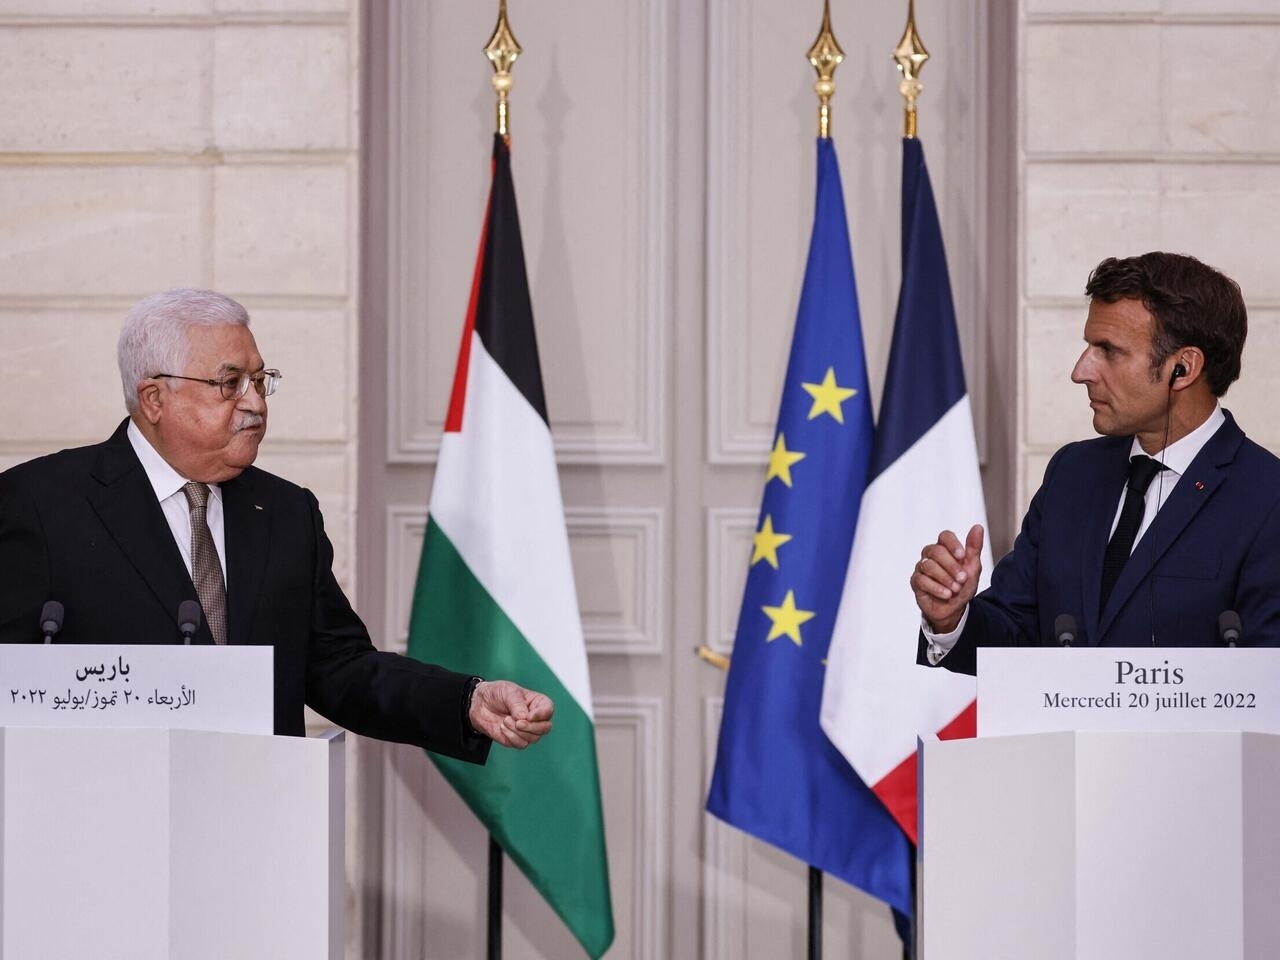 French President Emmanuel Macron hosted his Palestinian counterpart Mahmoud Abbas on Wednesday to discuss a solution to the Palestine-Israel conflict.